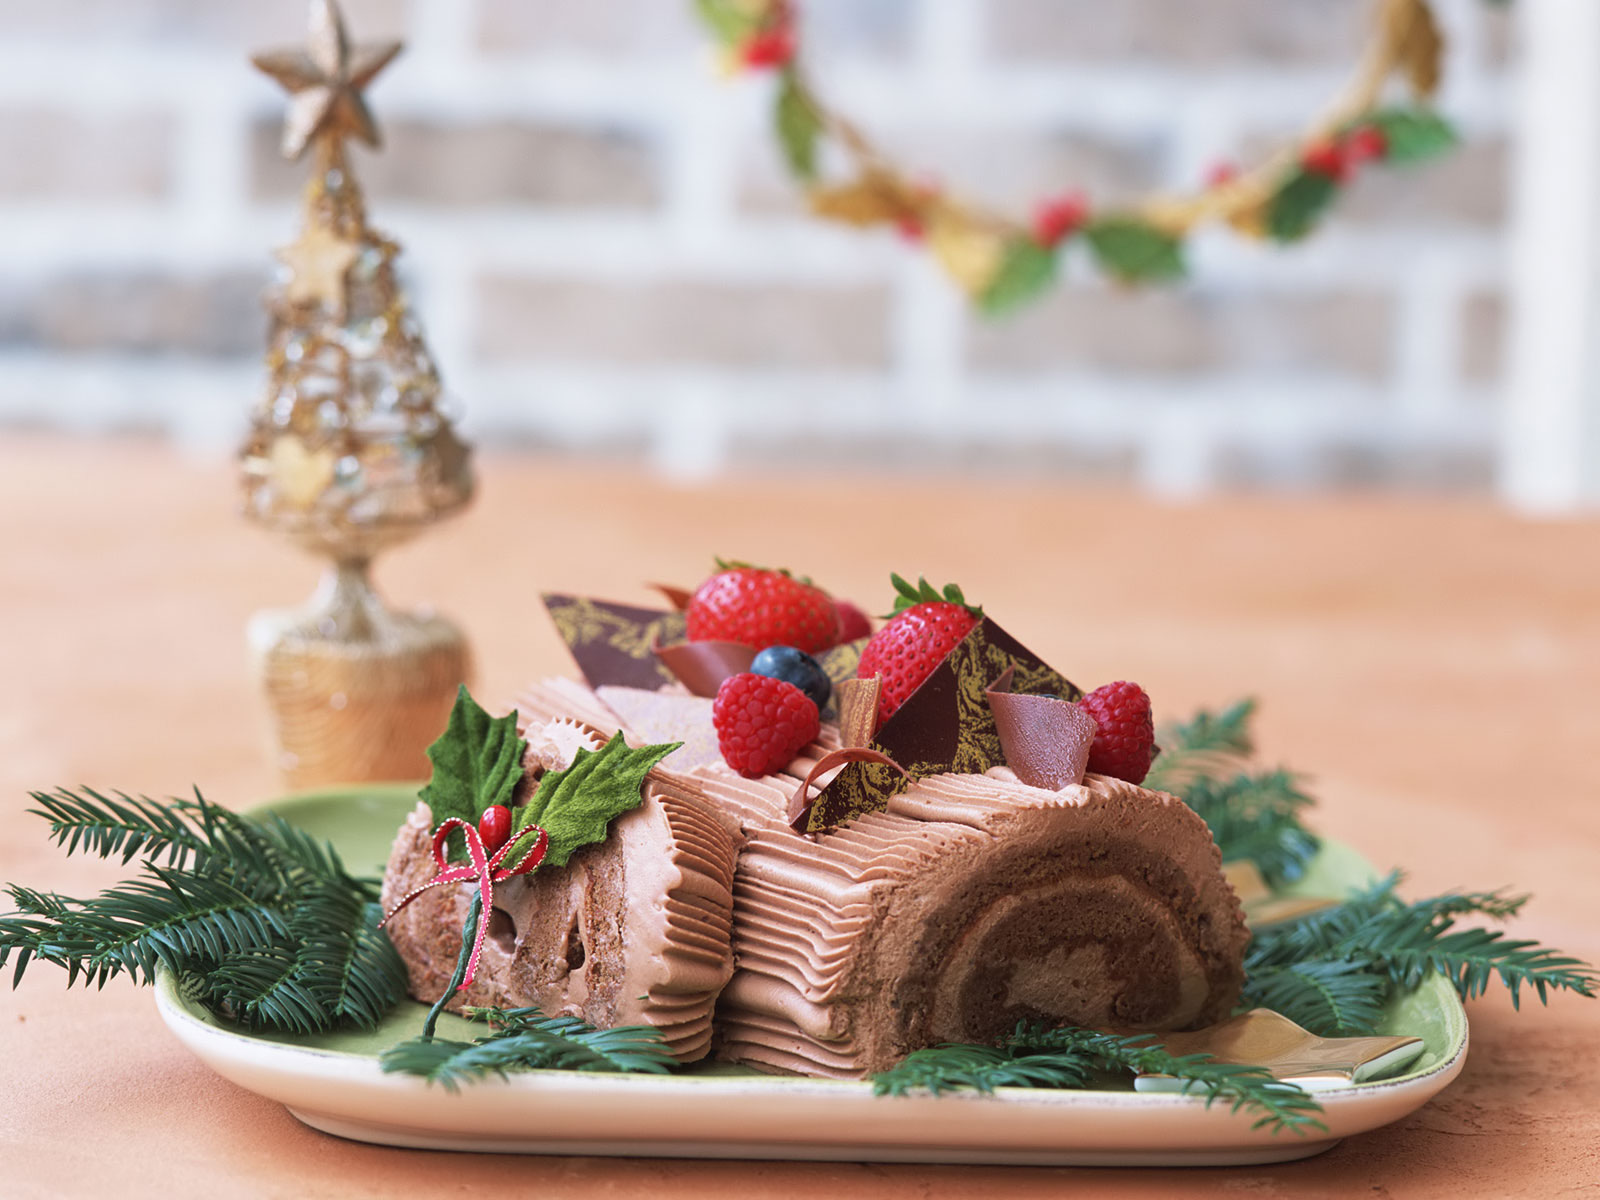 A festive holiday dessert with Christmas sweets.